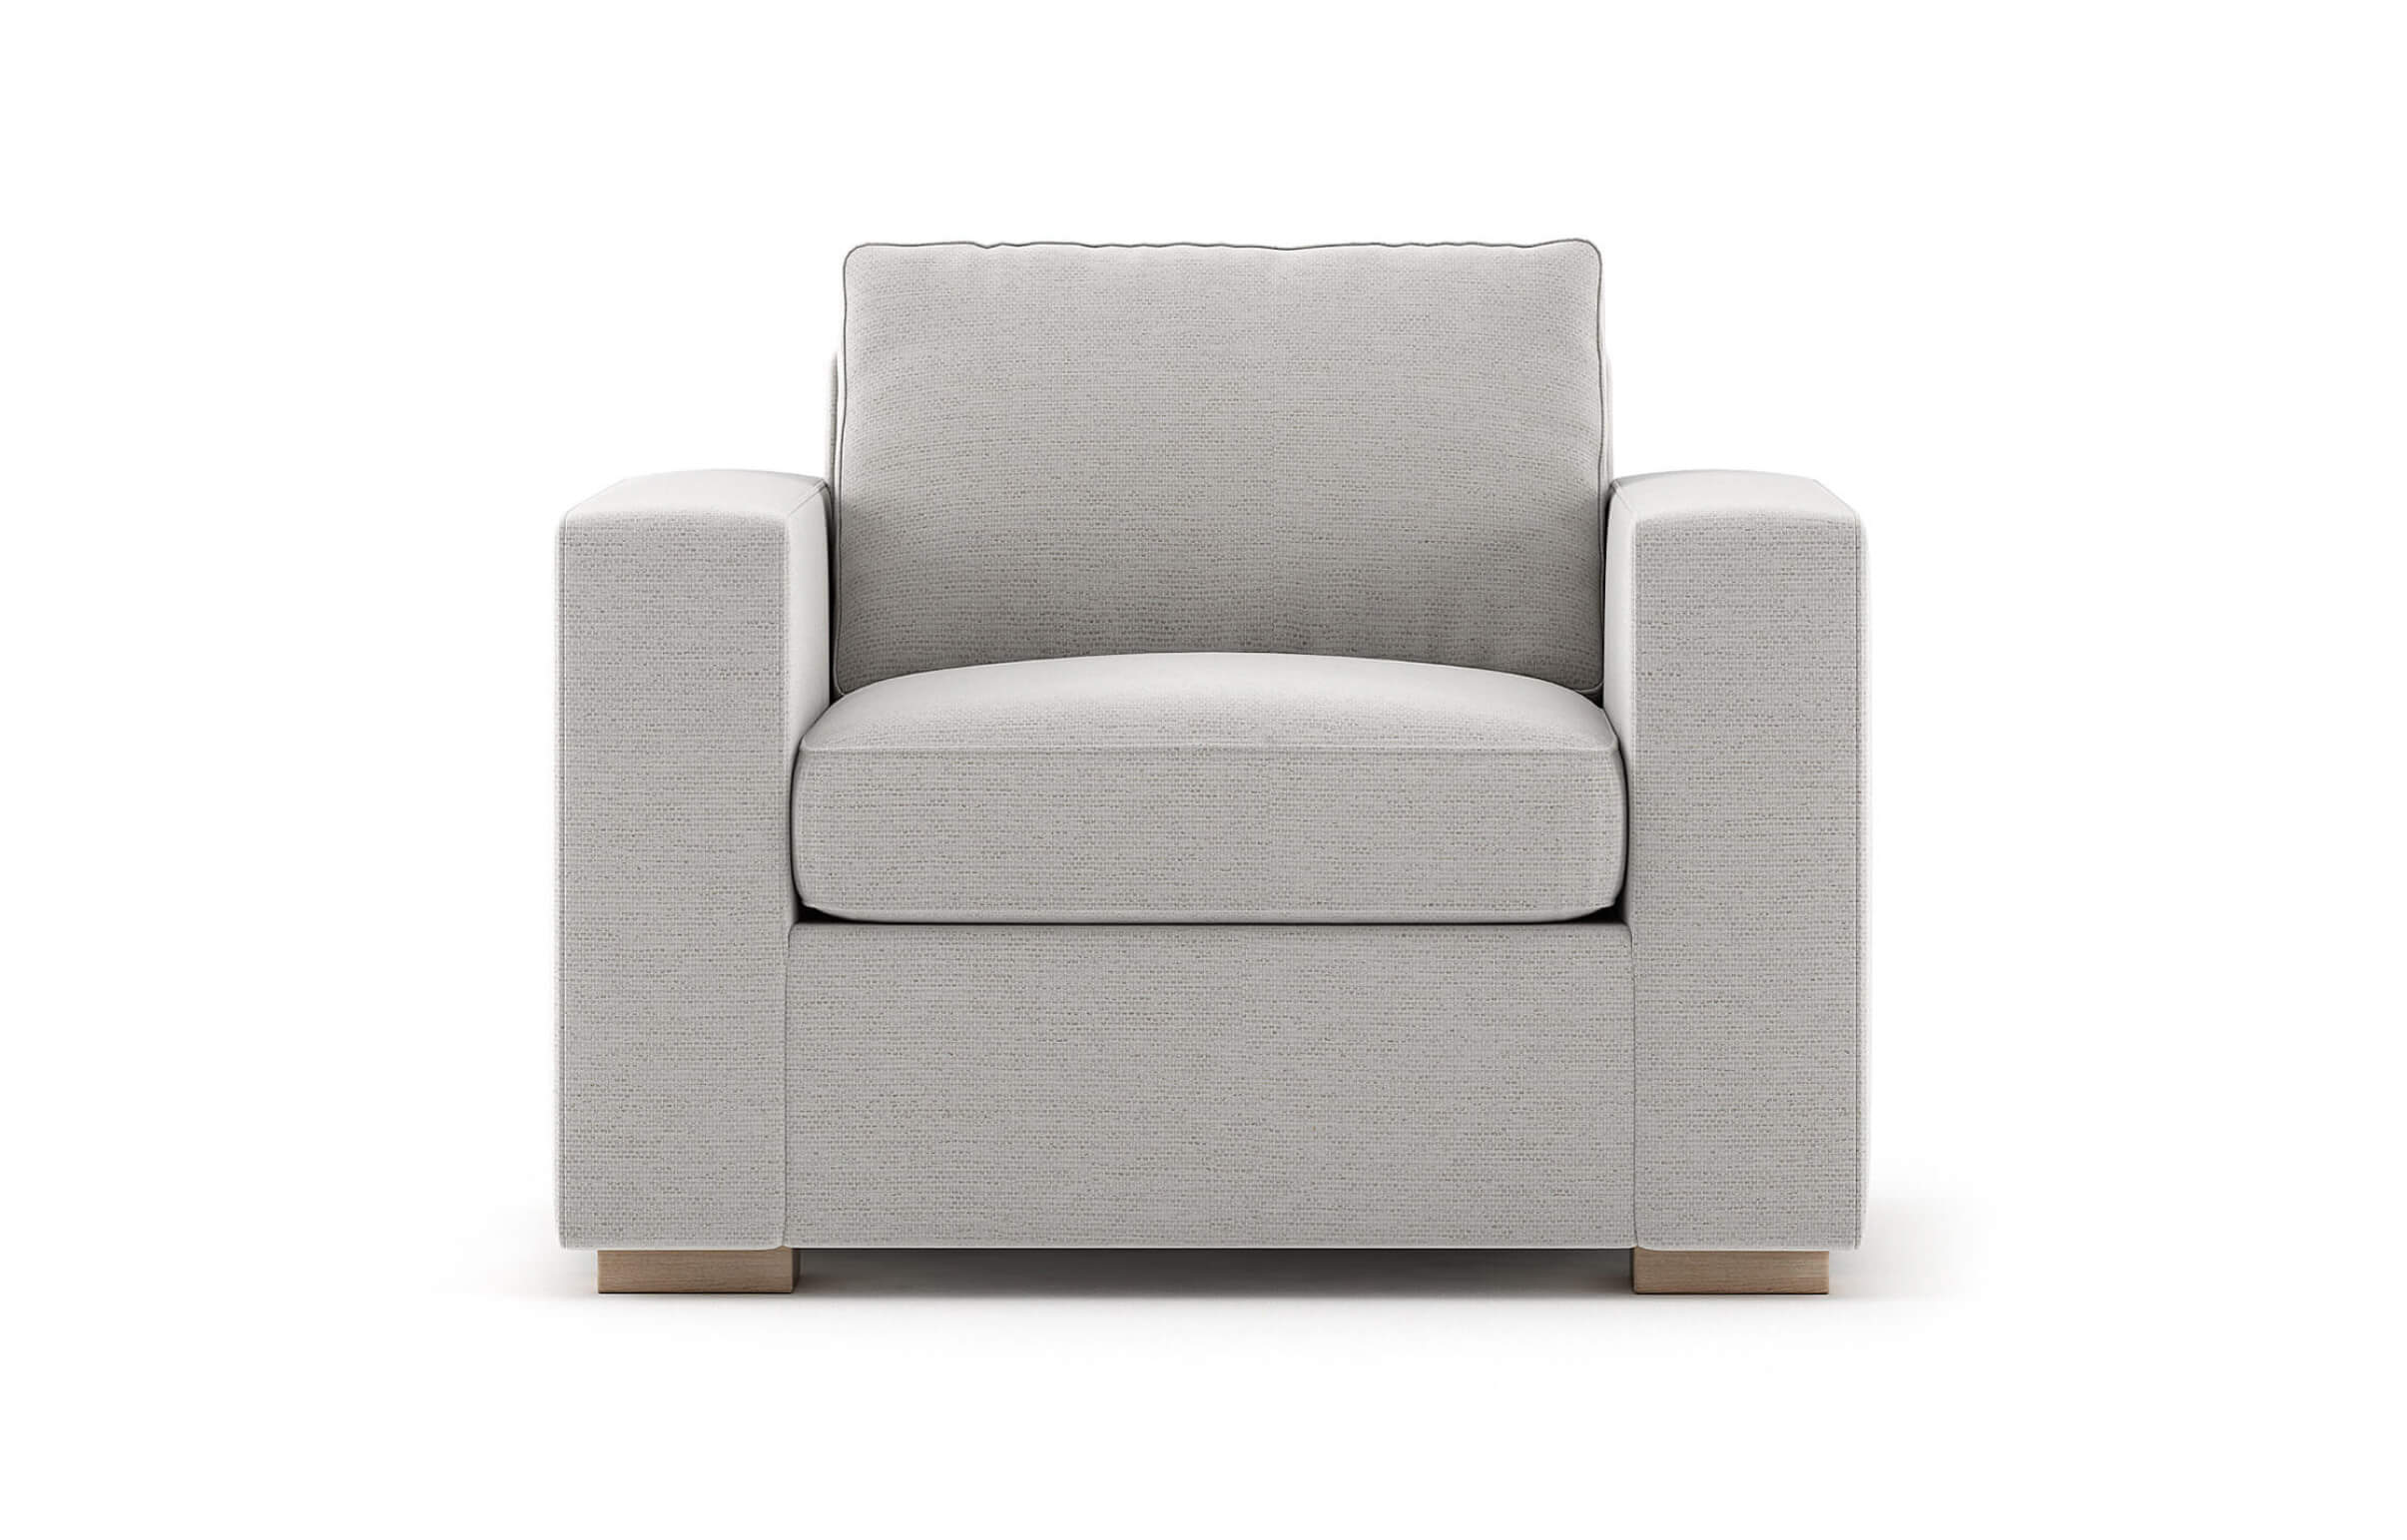 G: Rio Chair in gray fabric